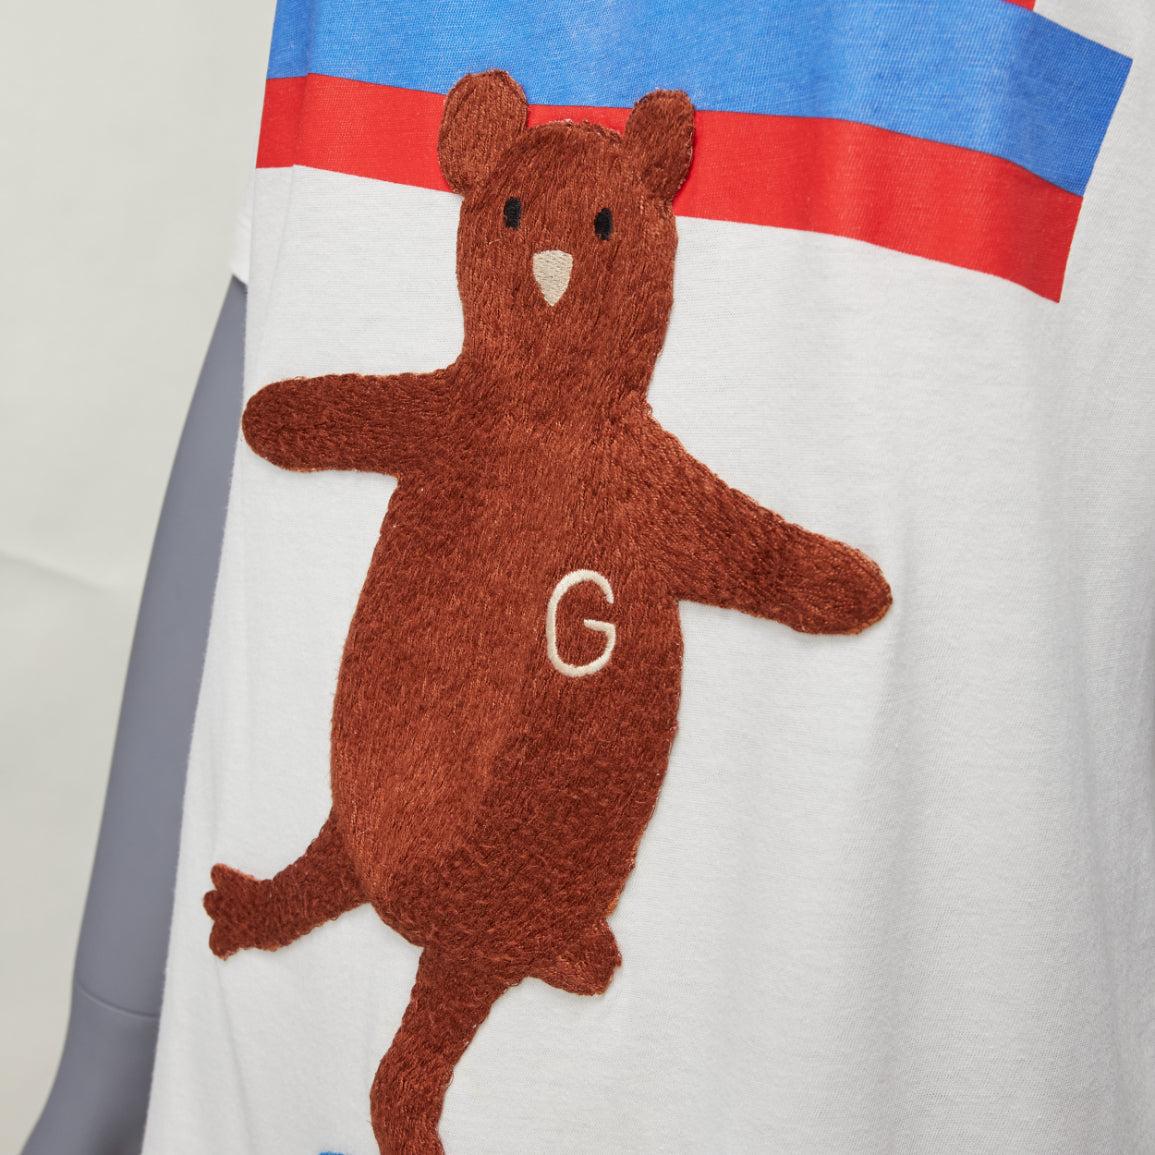 GUCCI Balancing Bear logo print round neck short oversized tshirt S
Reference: KYCG/A00057
Brand: Gucci
Designer: Alessandro Michele
Model: Dancing Bear
Material: Cotton
Color: White, Brown
Pattern: Cartoon
Closure: Pullover
Made in: